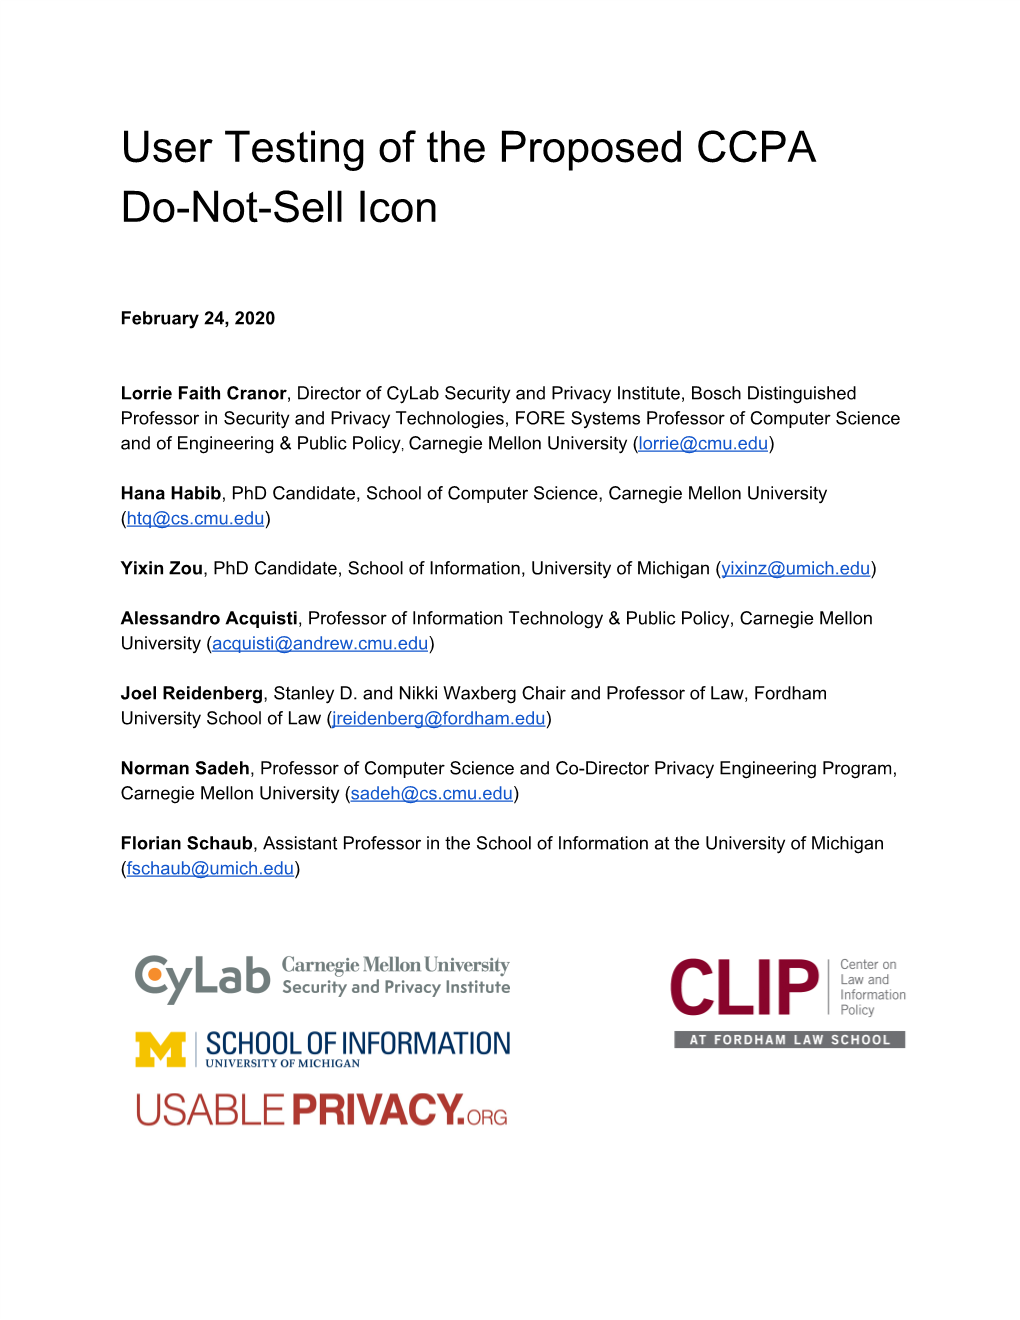 User Testing of the Proposed CCPA Do-Not-Sell Icon